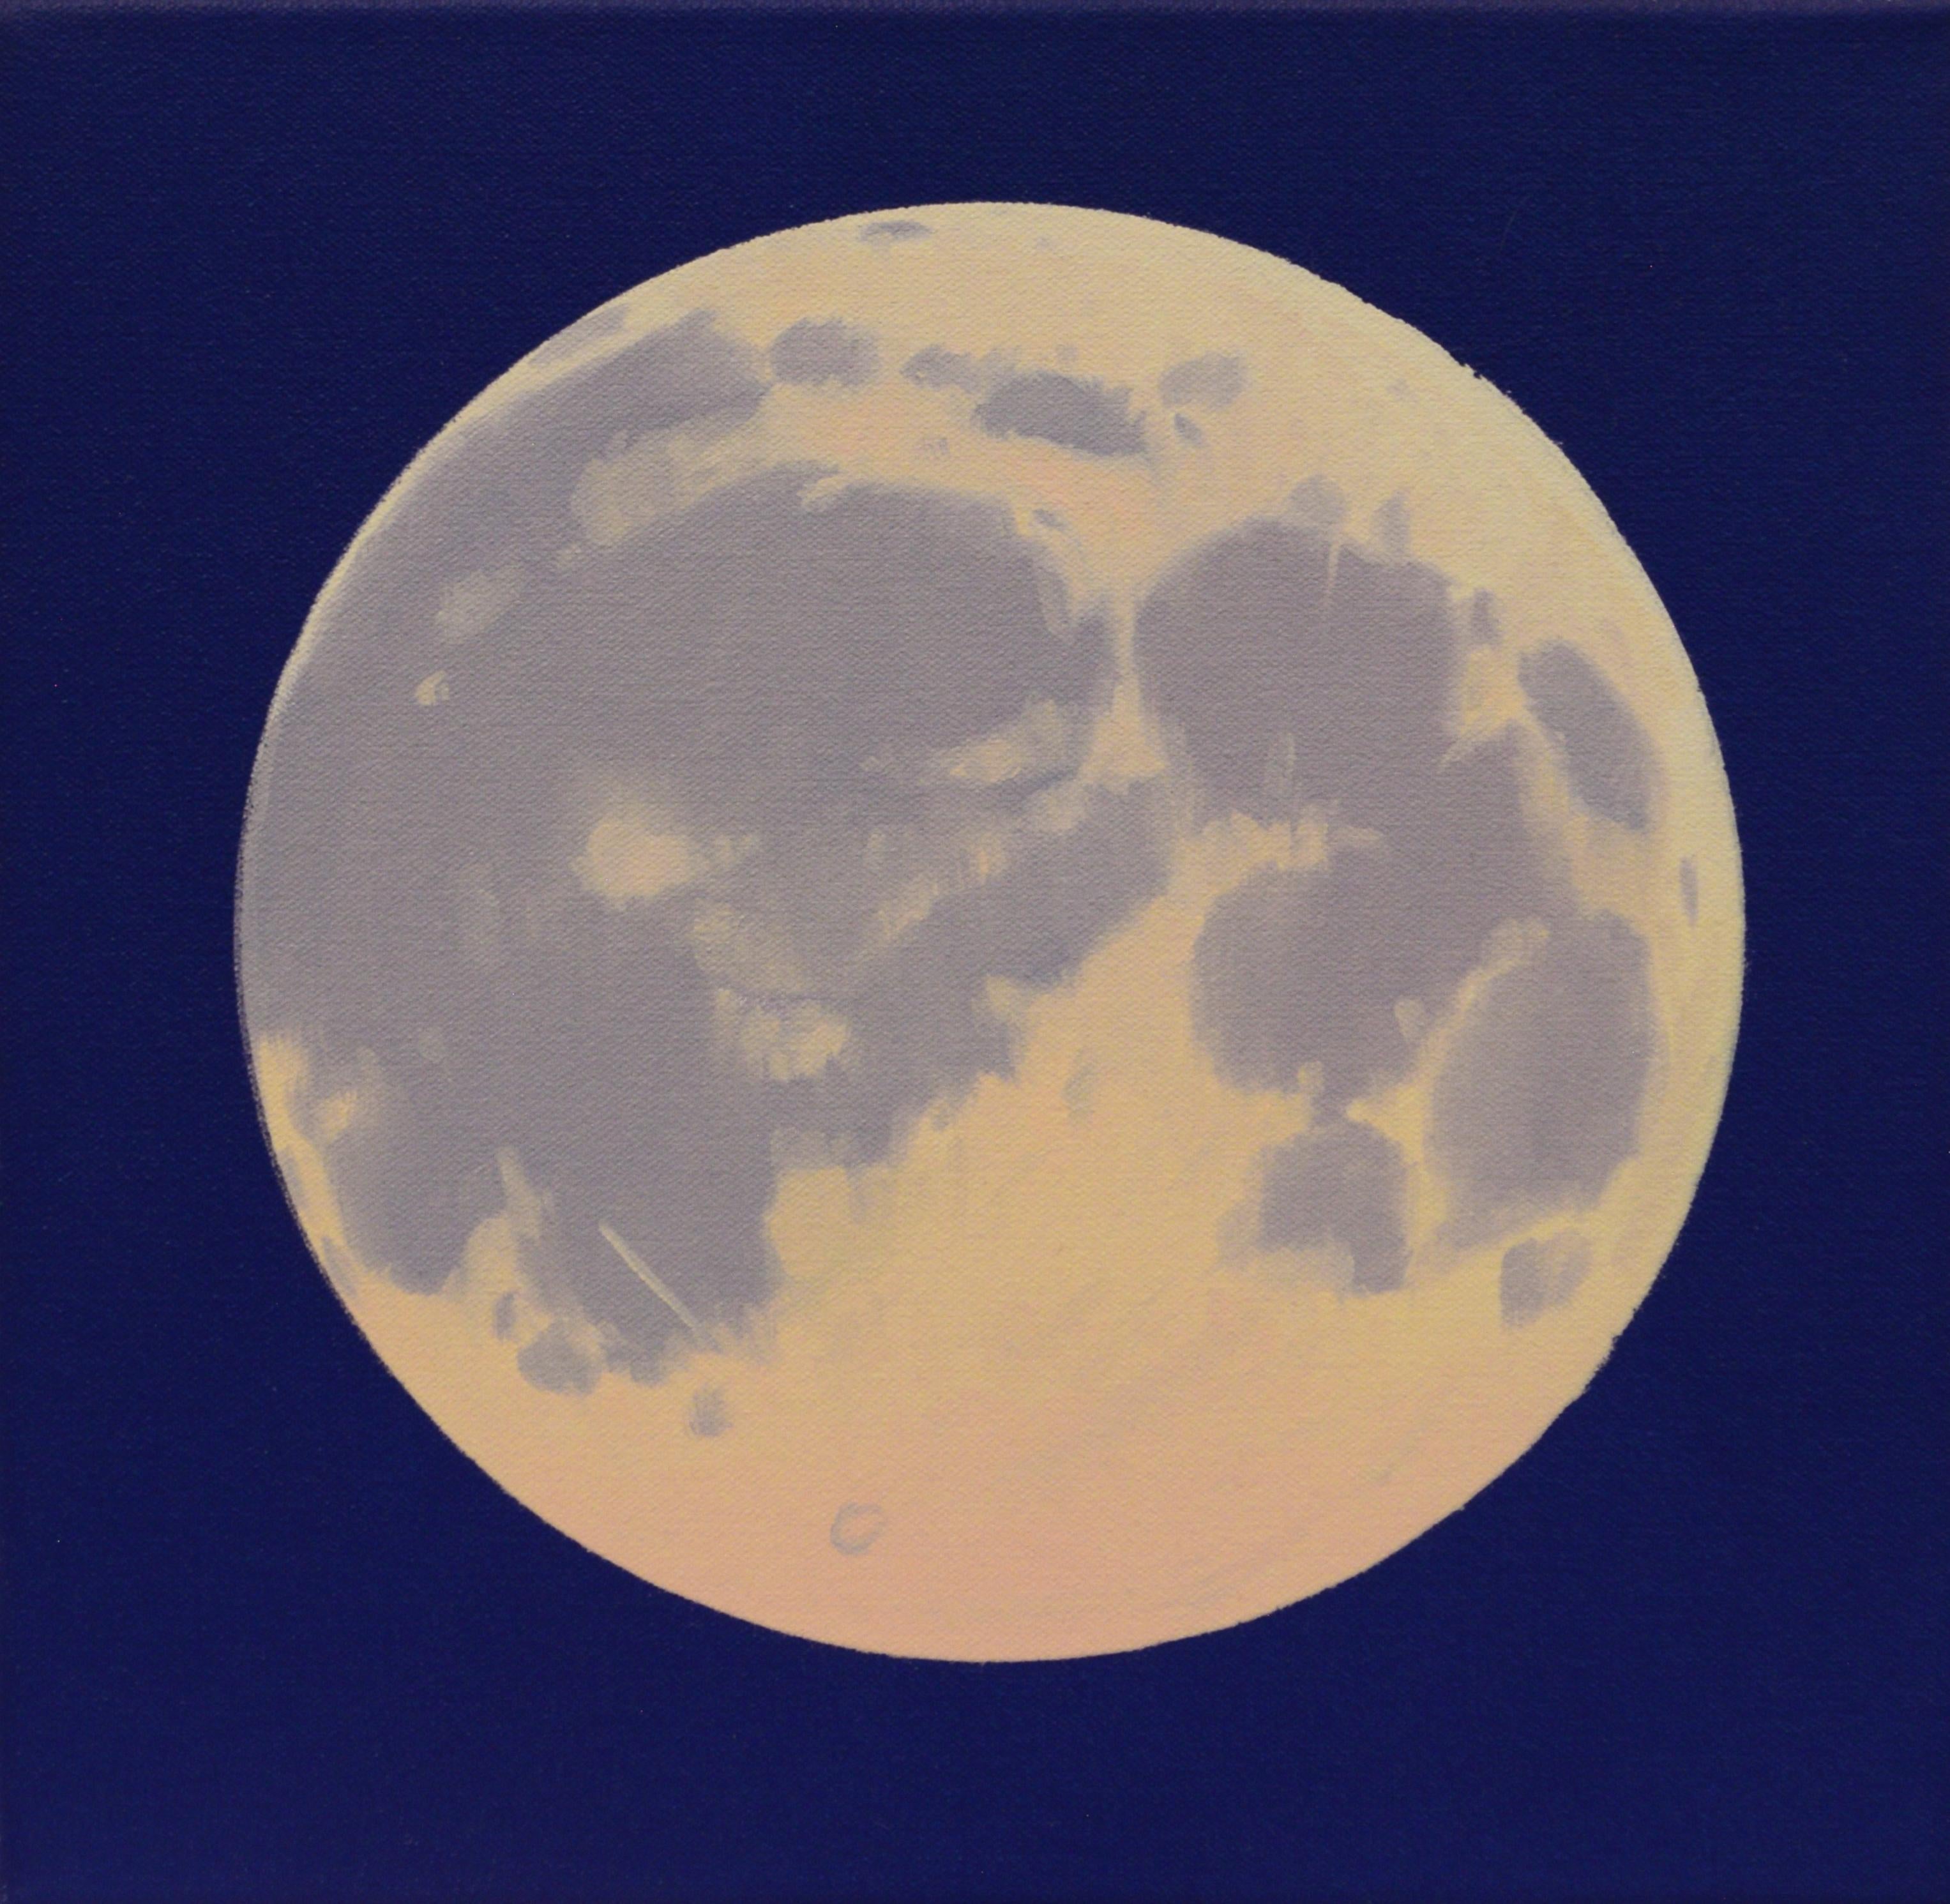 Moon 11 - Painting by Beau Carey